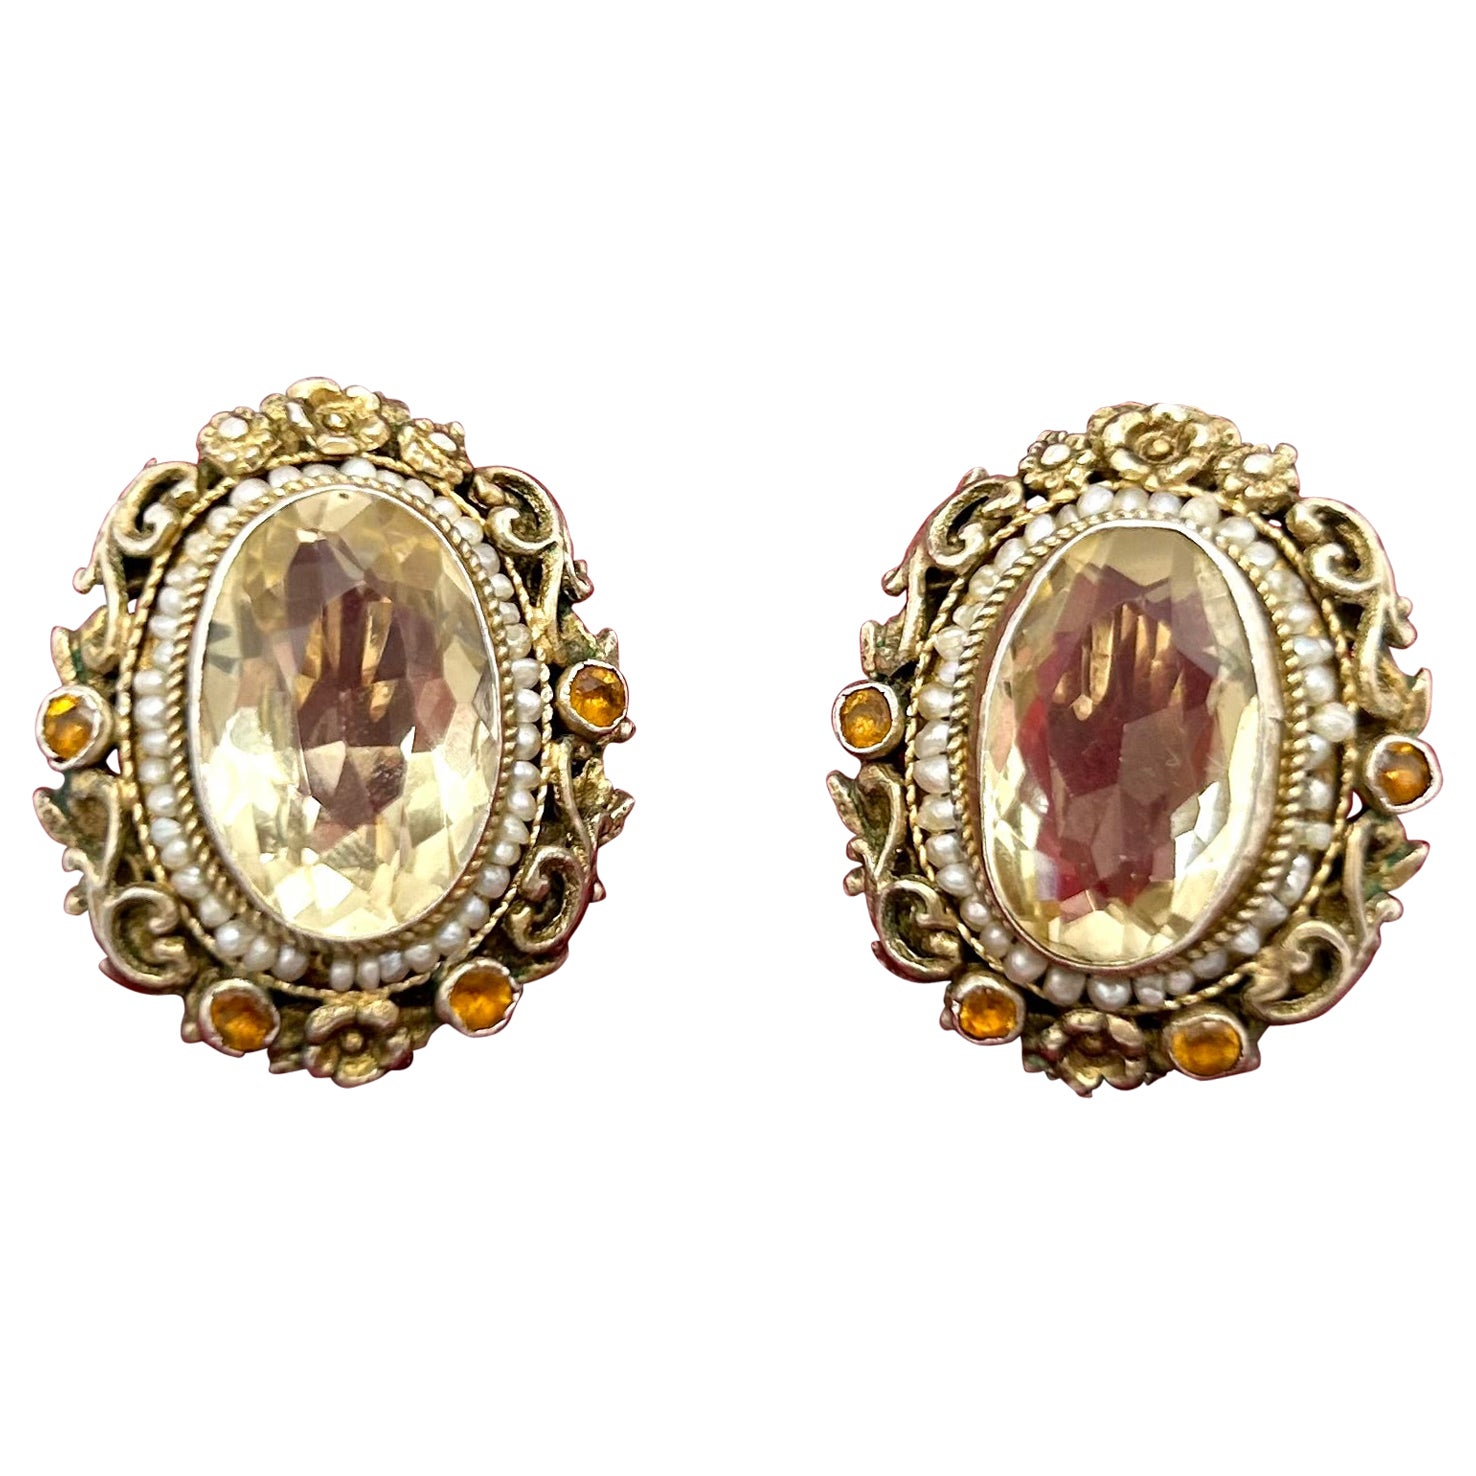 Antique silver earrings with citrines, garnets and pearls, circa 1900. For Sale